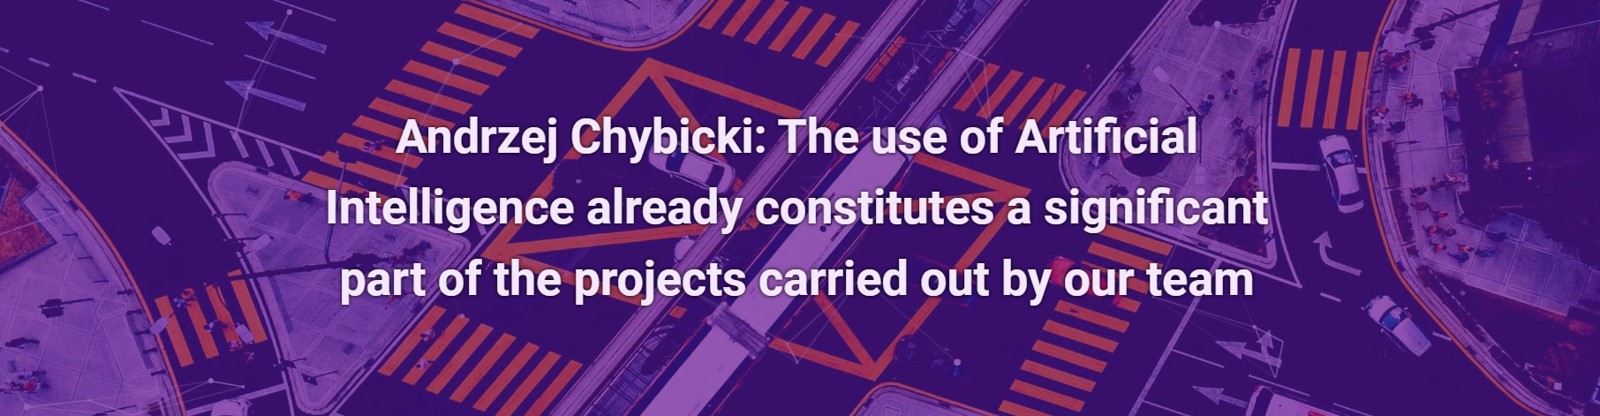 Andrzej Chybicki: The use of Artificial Intelligence already constitutes a significant part of the projects carried out by our team